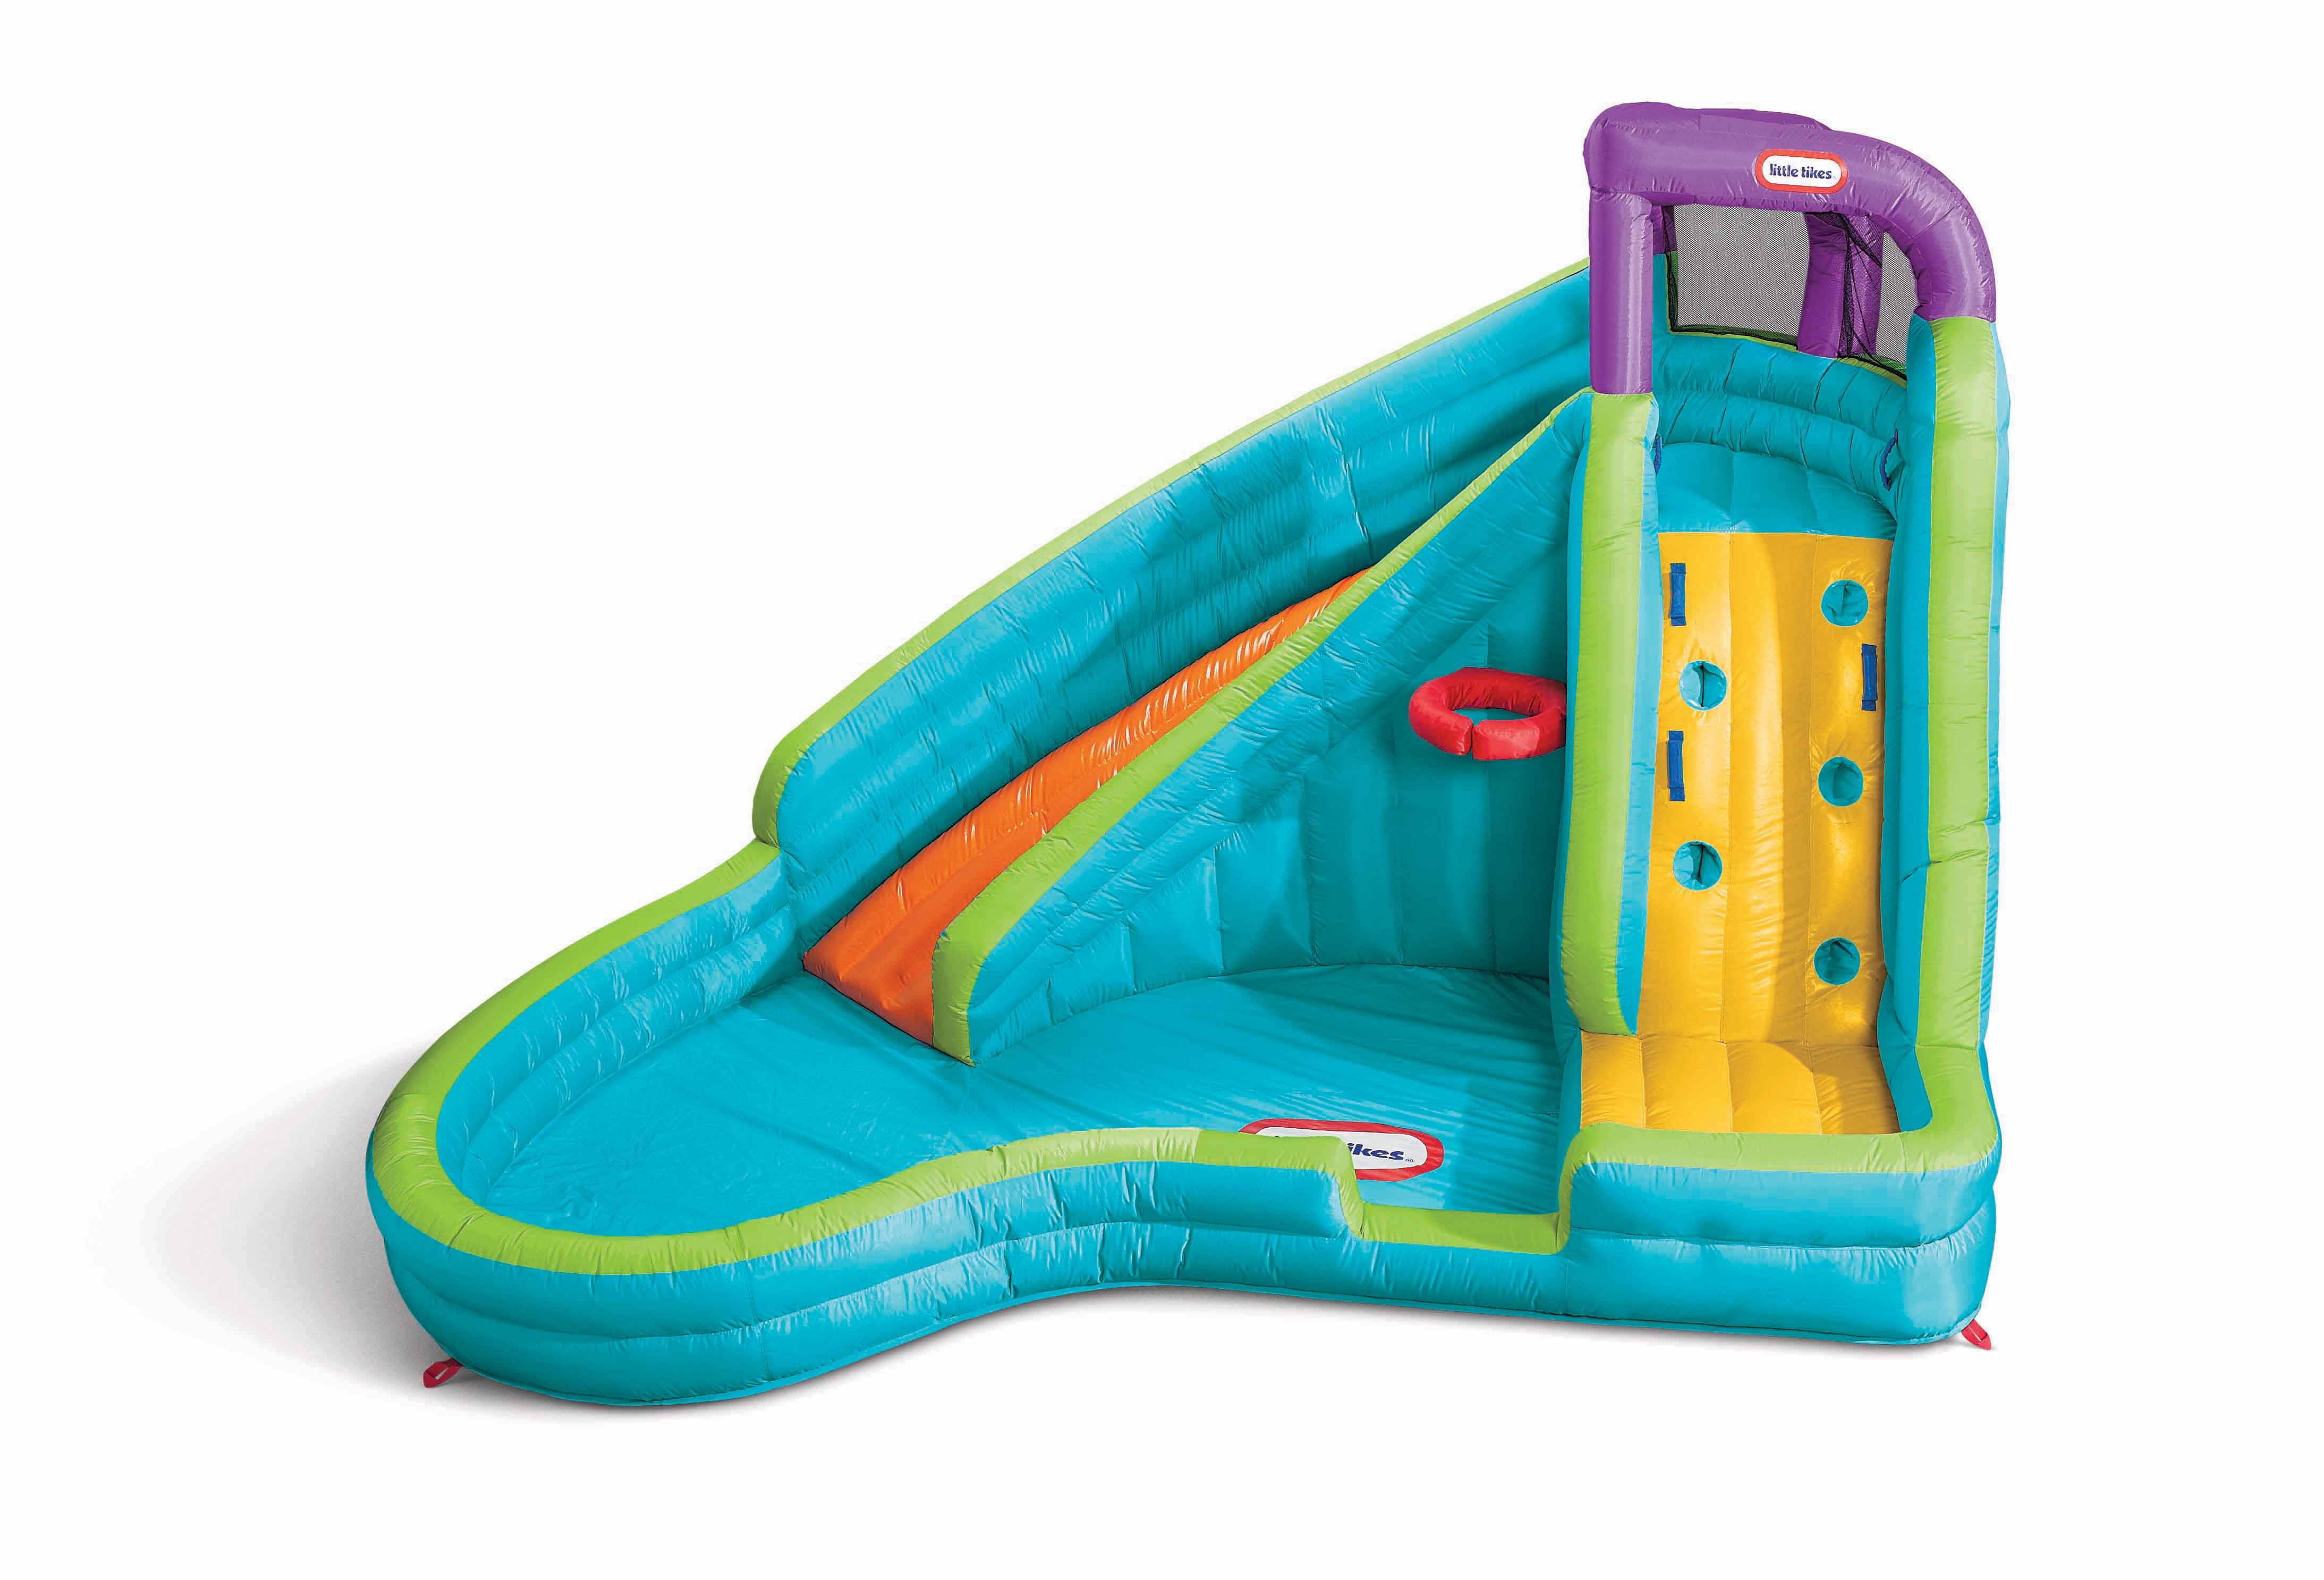 Little Tikes Slam 'n Curve Inflatable Water Slide with Blower - image 3 of 12